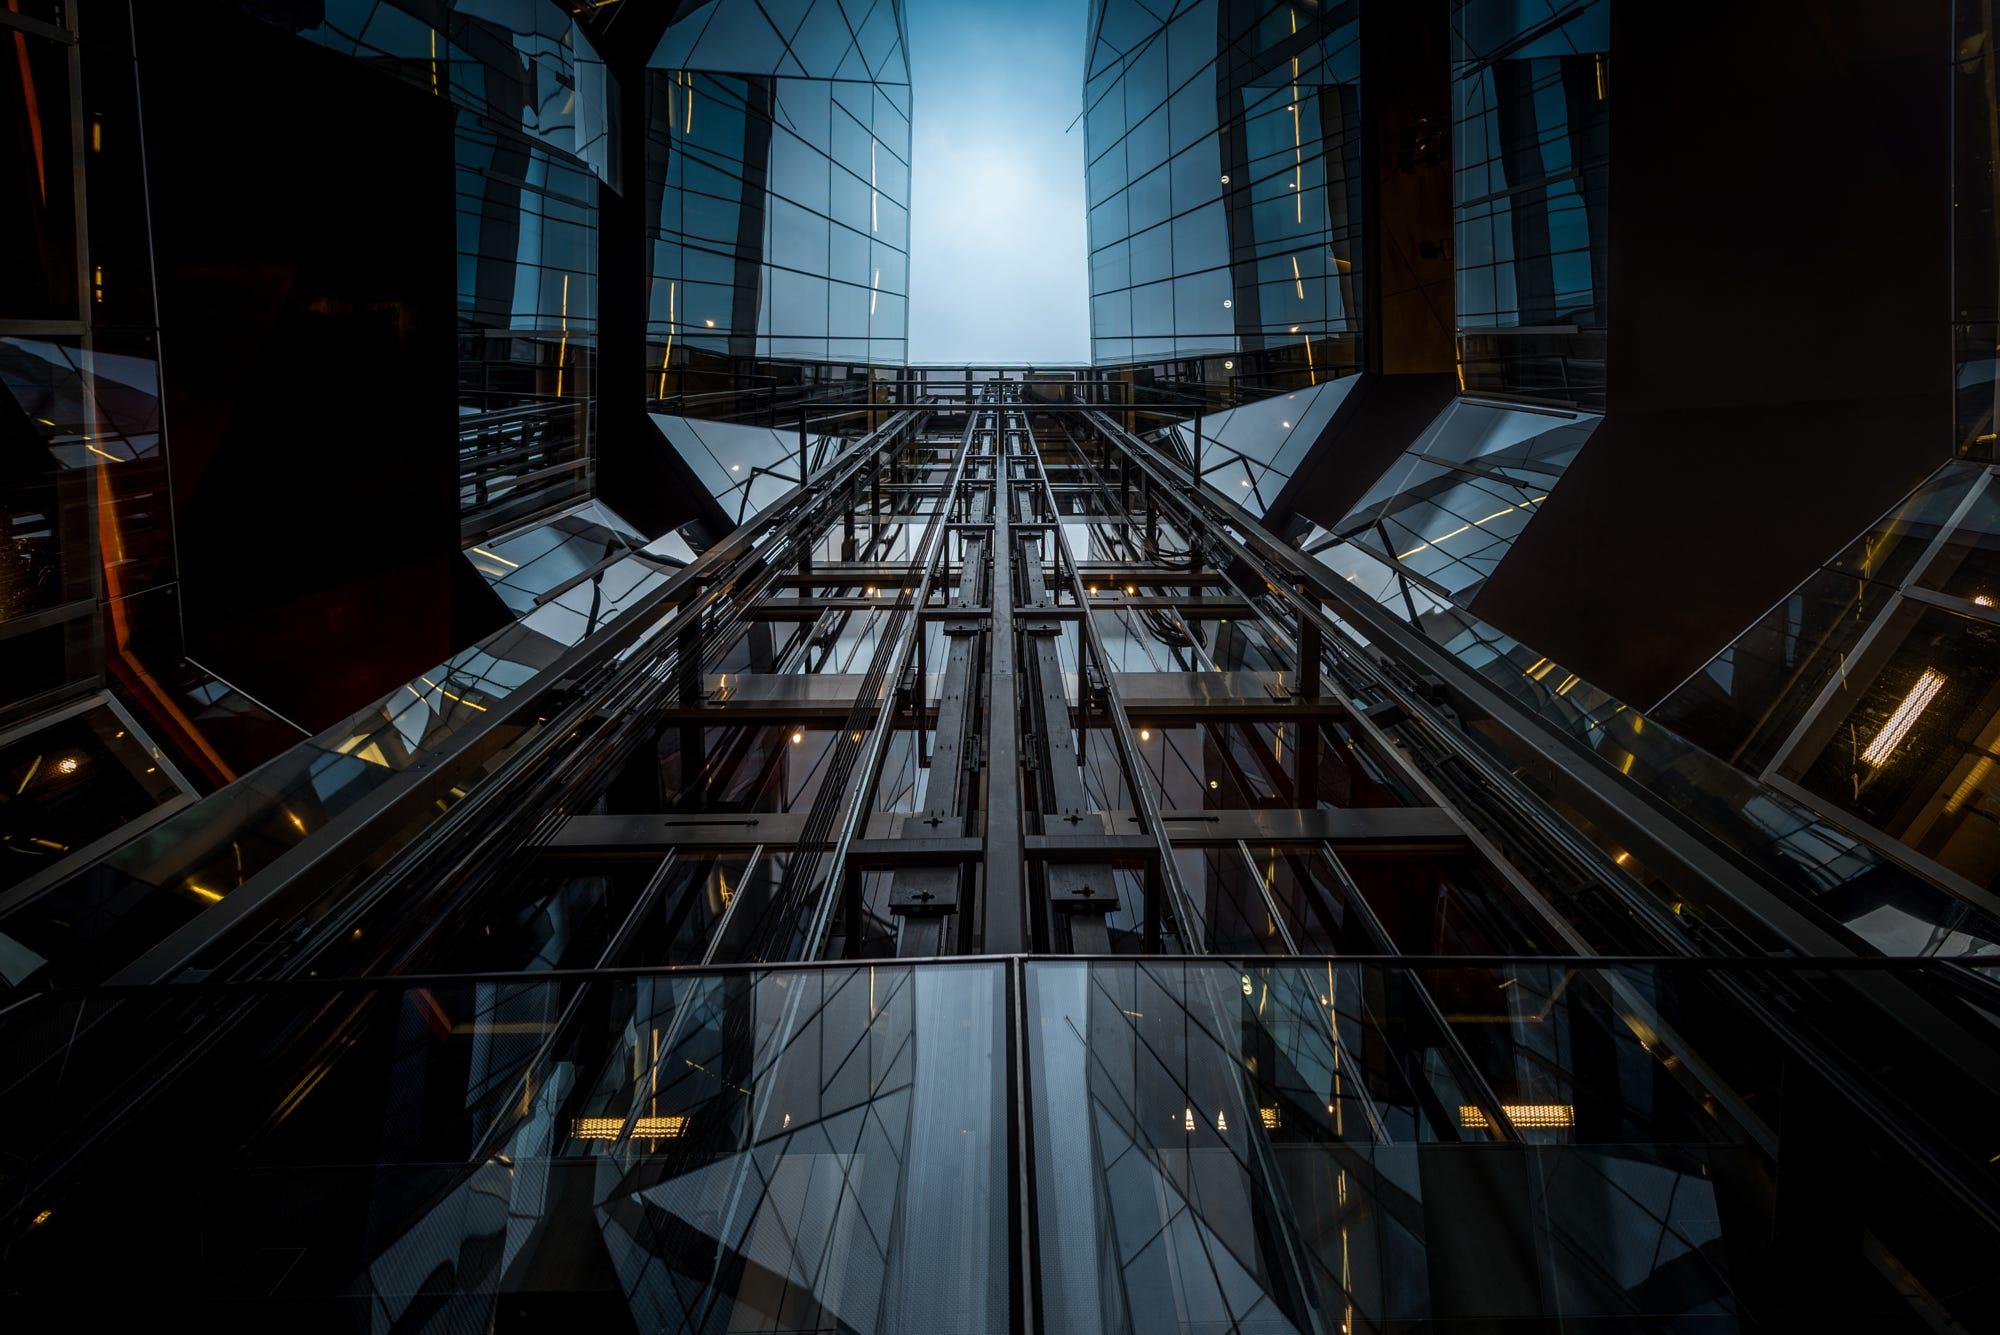 The Great Glass Elevator